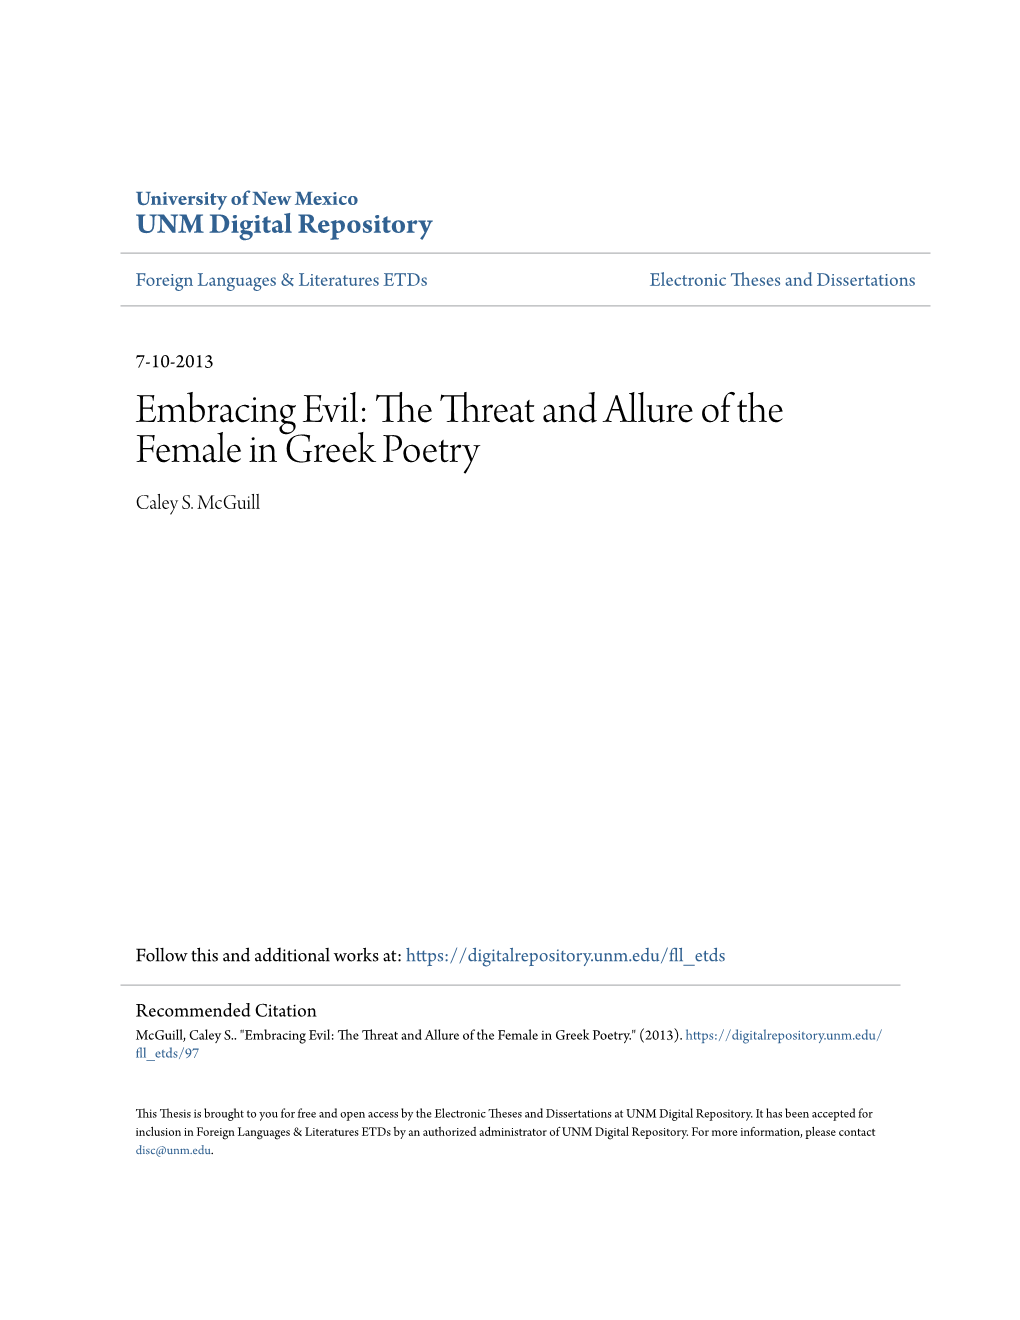 The Threat and Allure of the Female in Greek Poetry Caley S